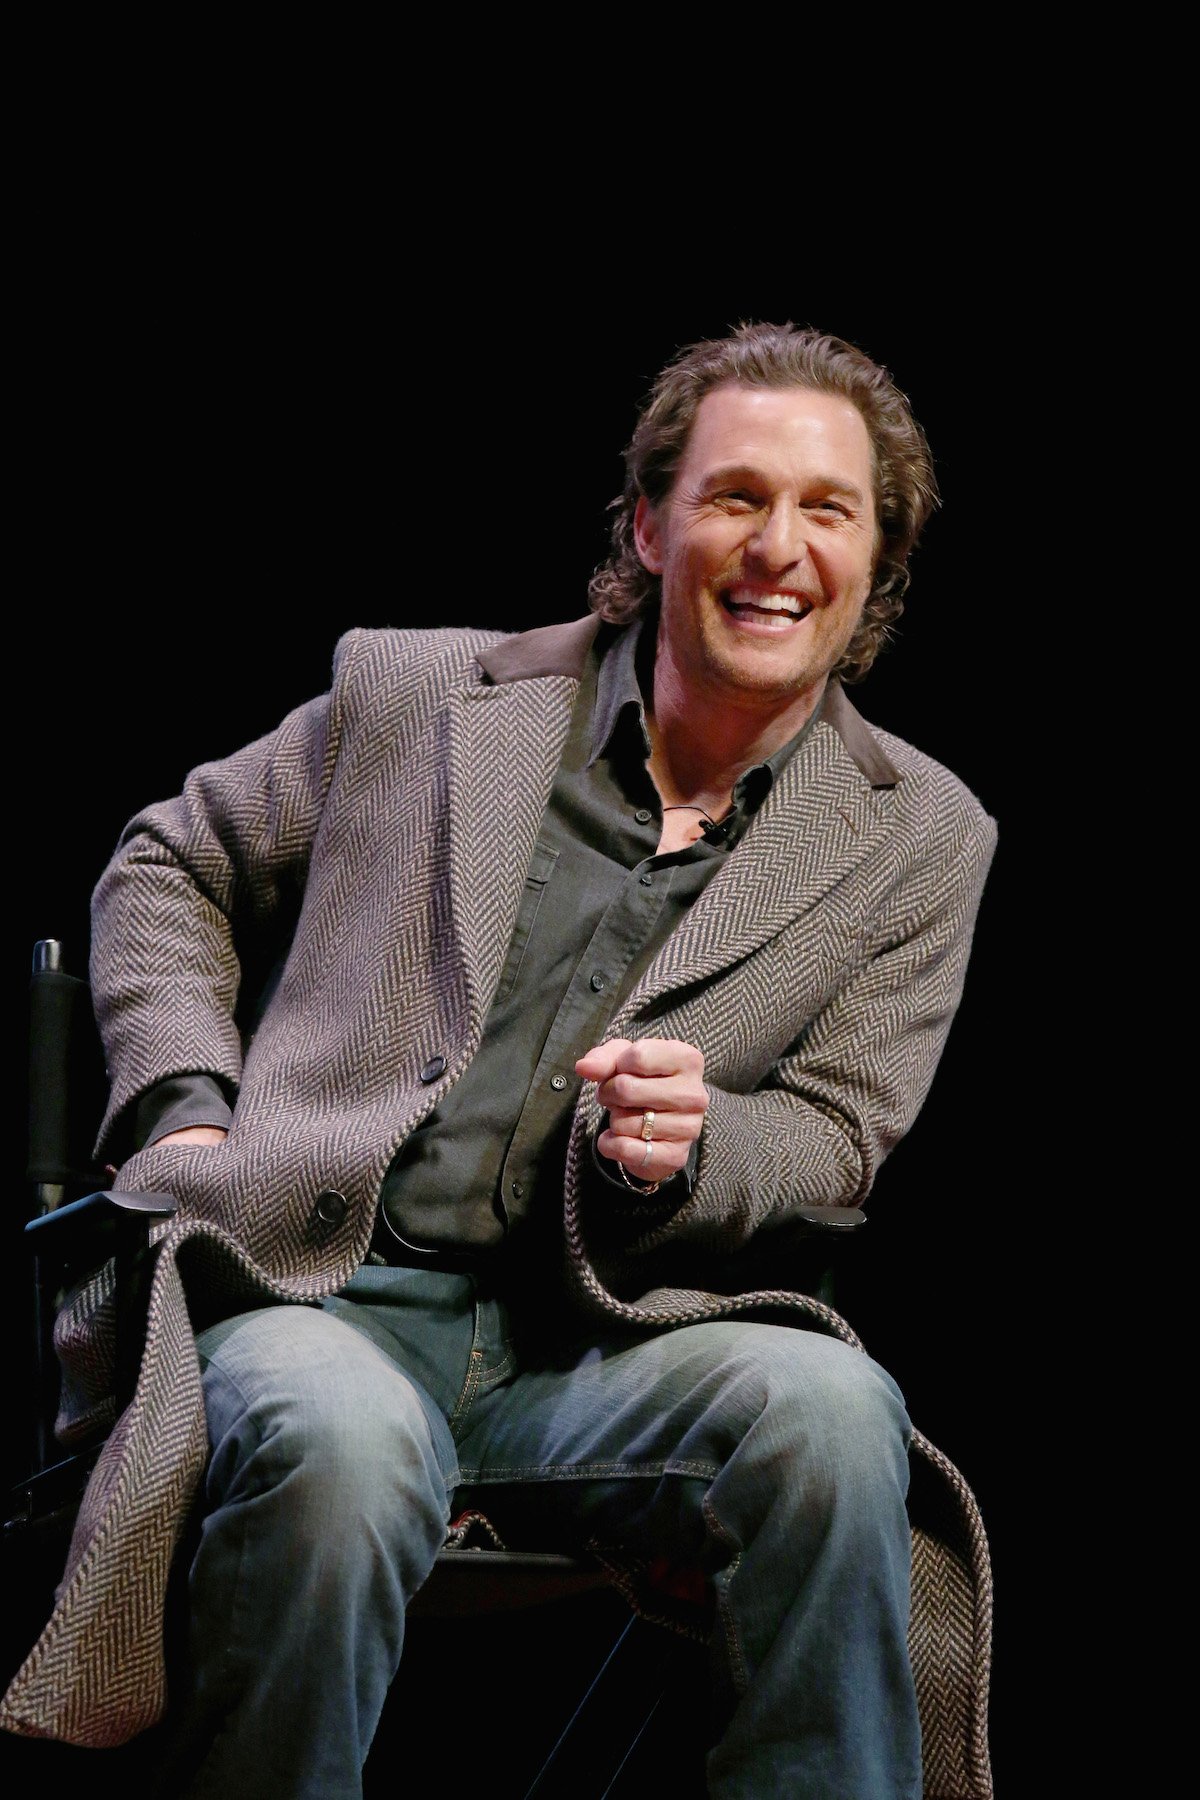 Matthew McConaughey sits on stage in a brown patterned coat , as he smiles to an audience on stage